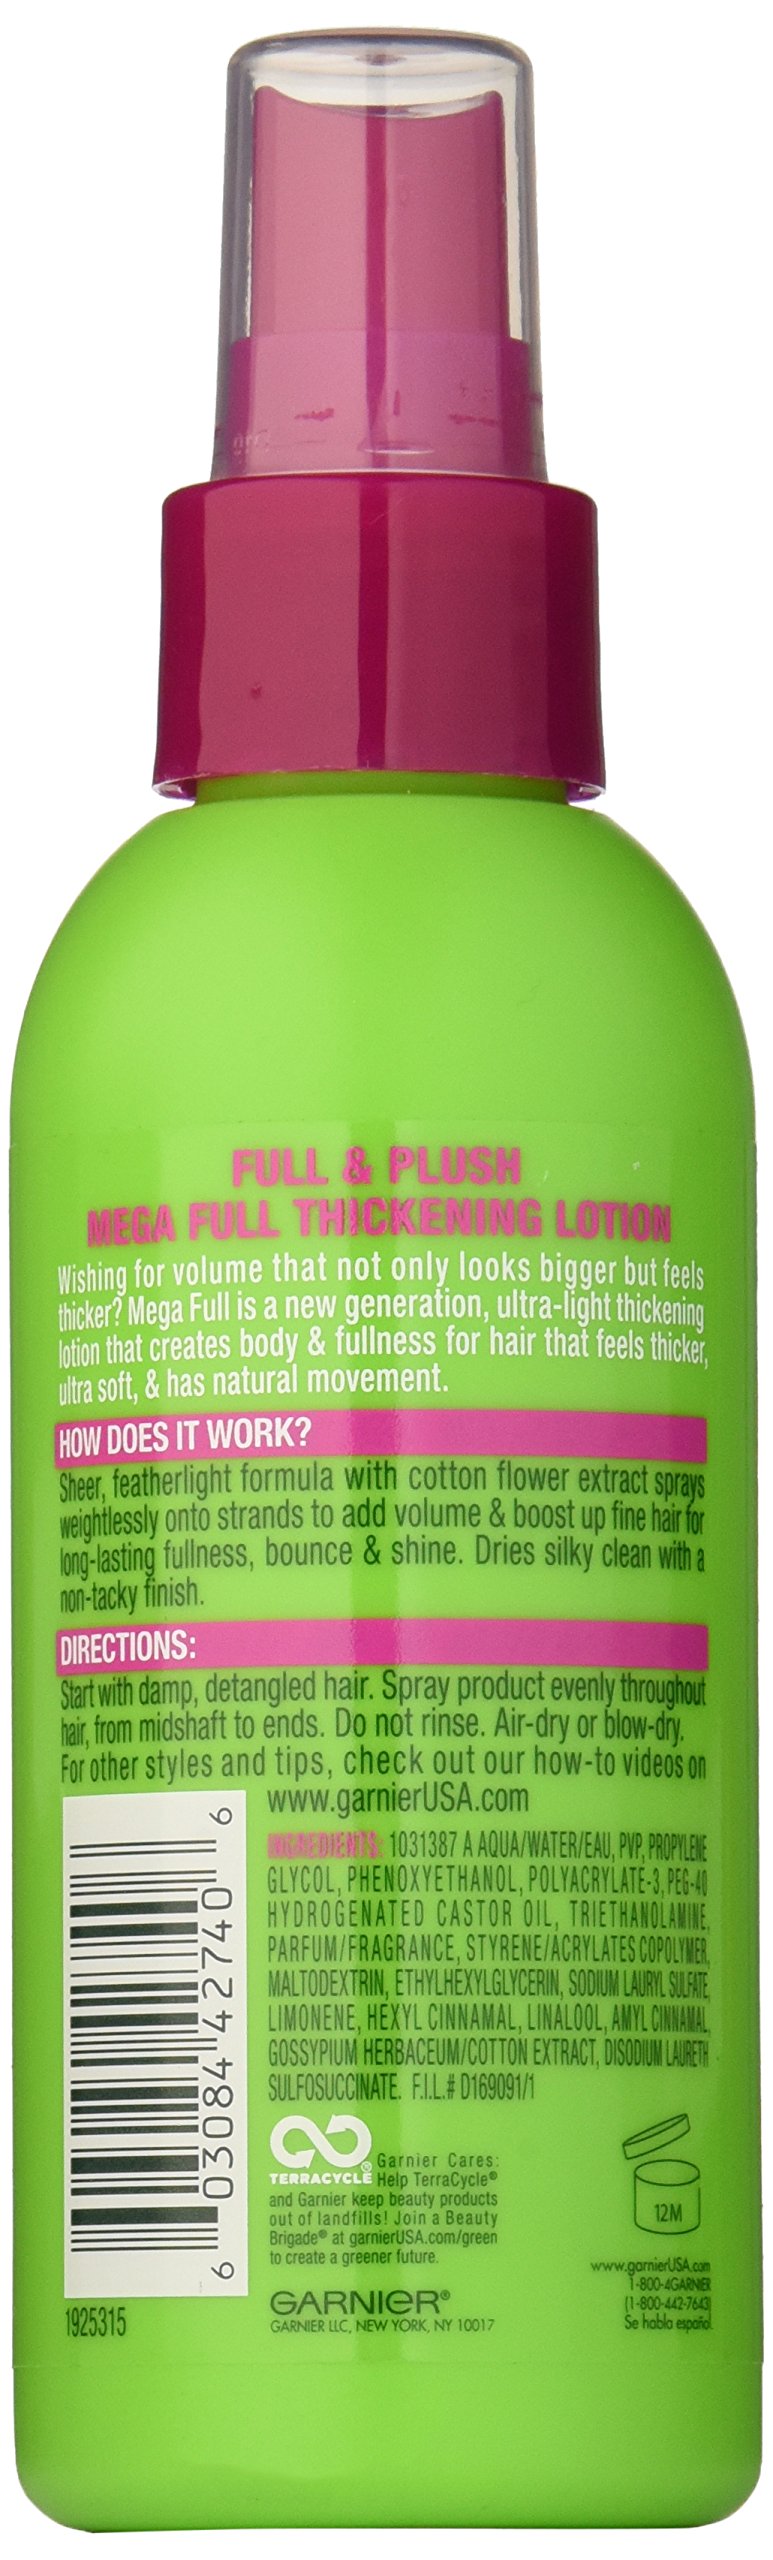 Garnier Fructis Style Mega Full Thickening Lotion, 5.0 Oz, 1 Count (Packaging May Vary)